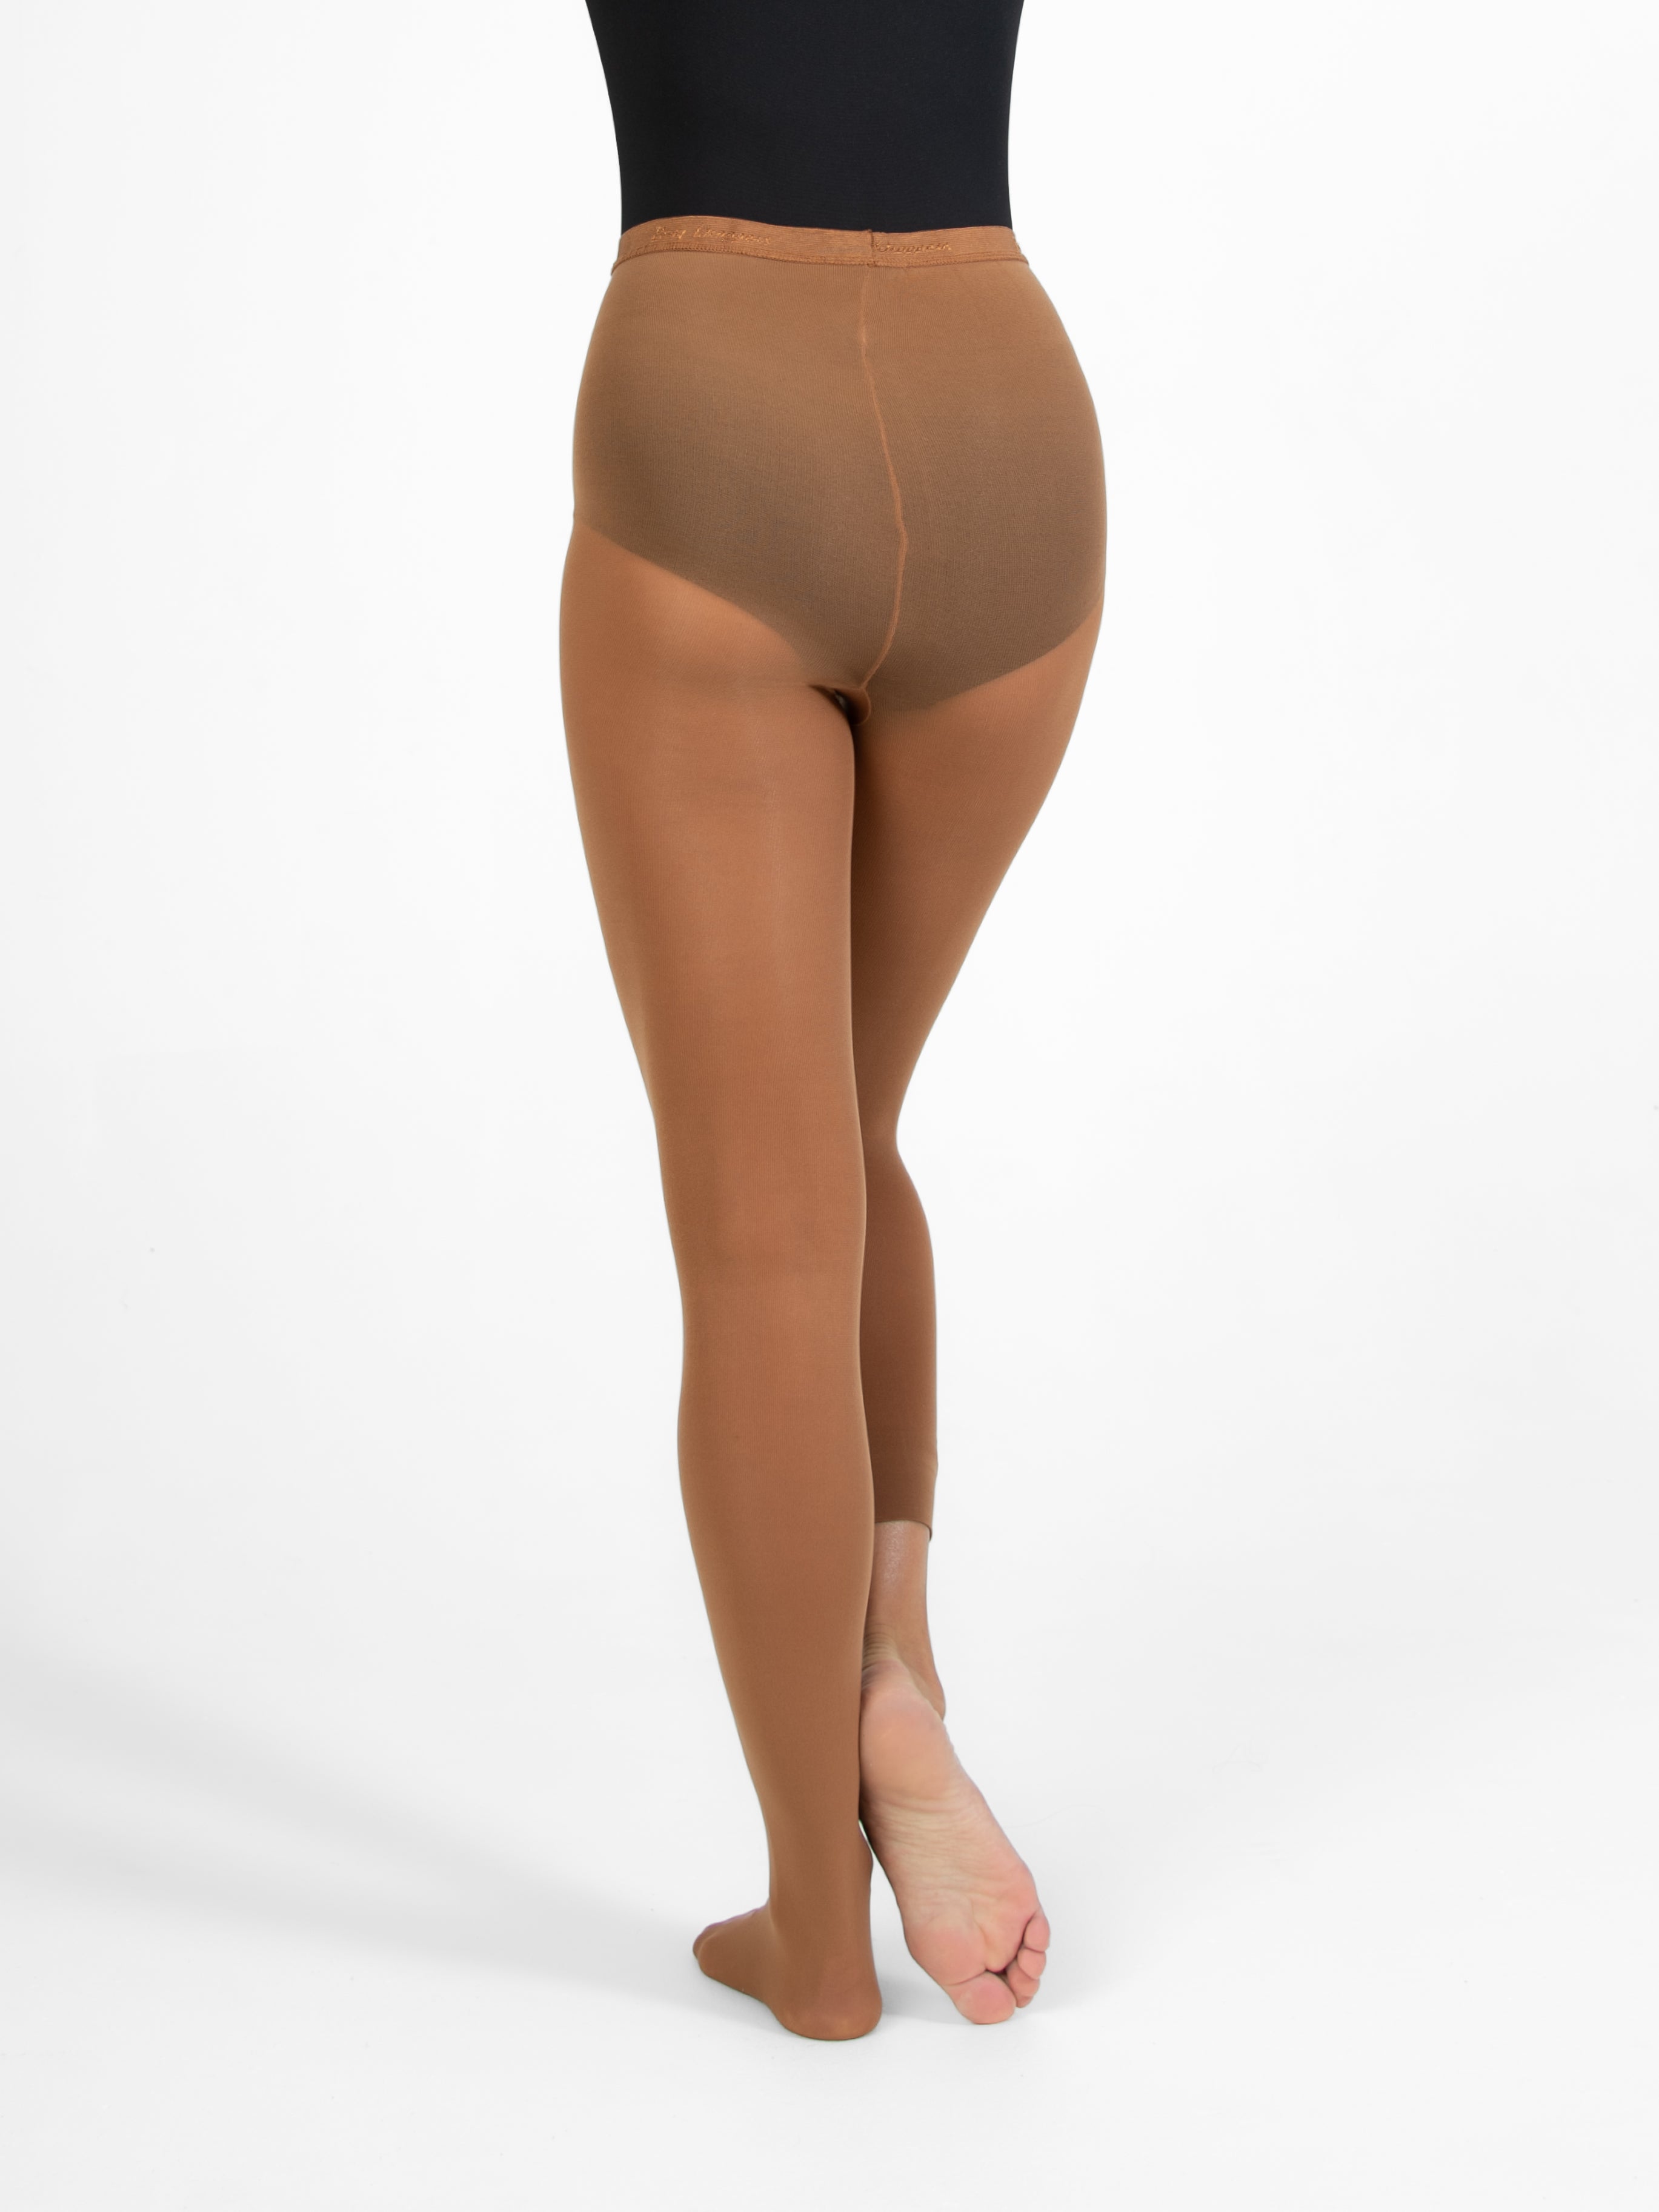 Women's Open Fishnet Tights - A New Day™ Cocoa S/M